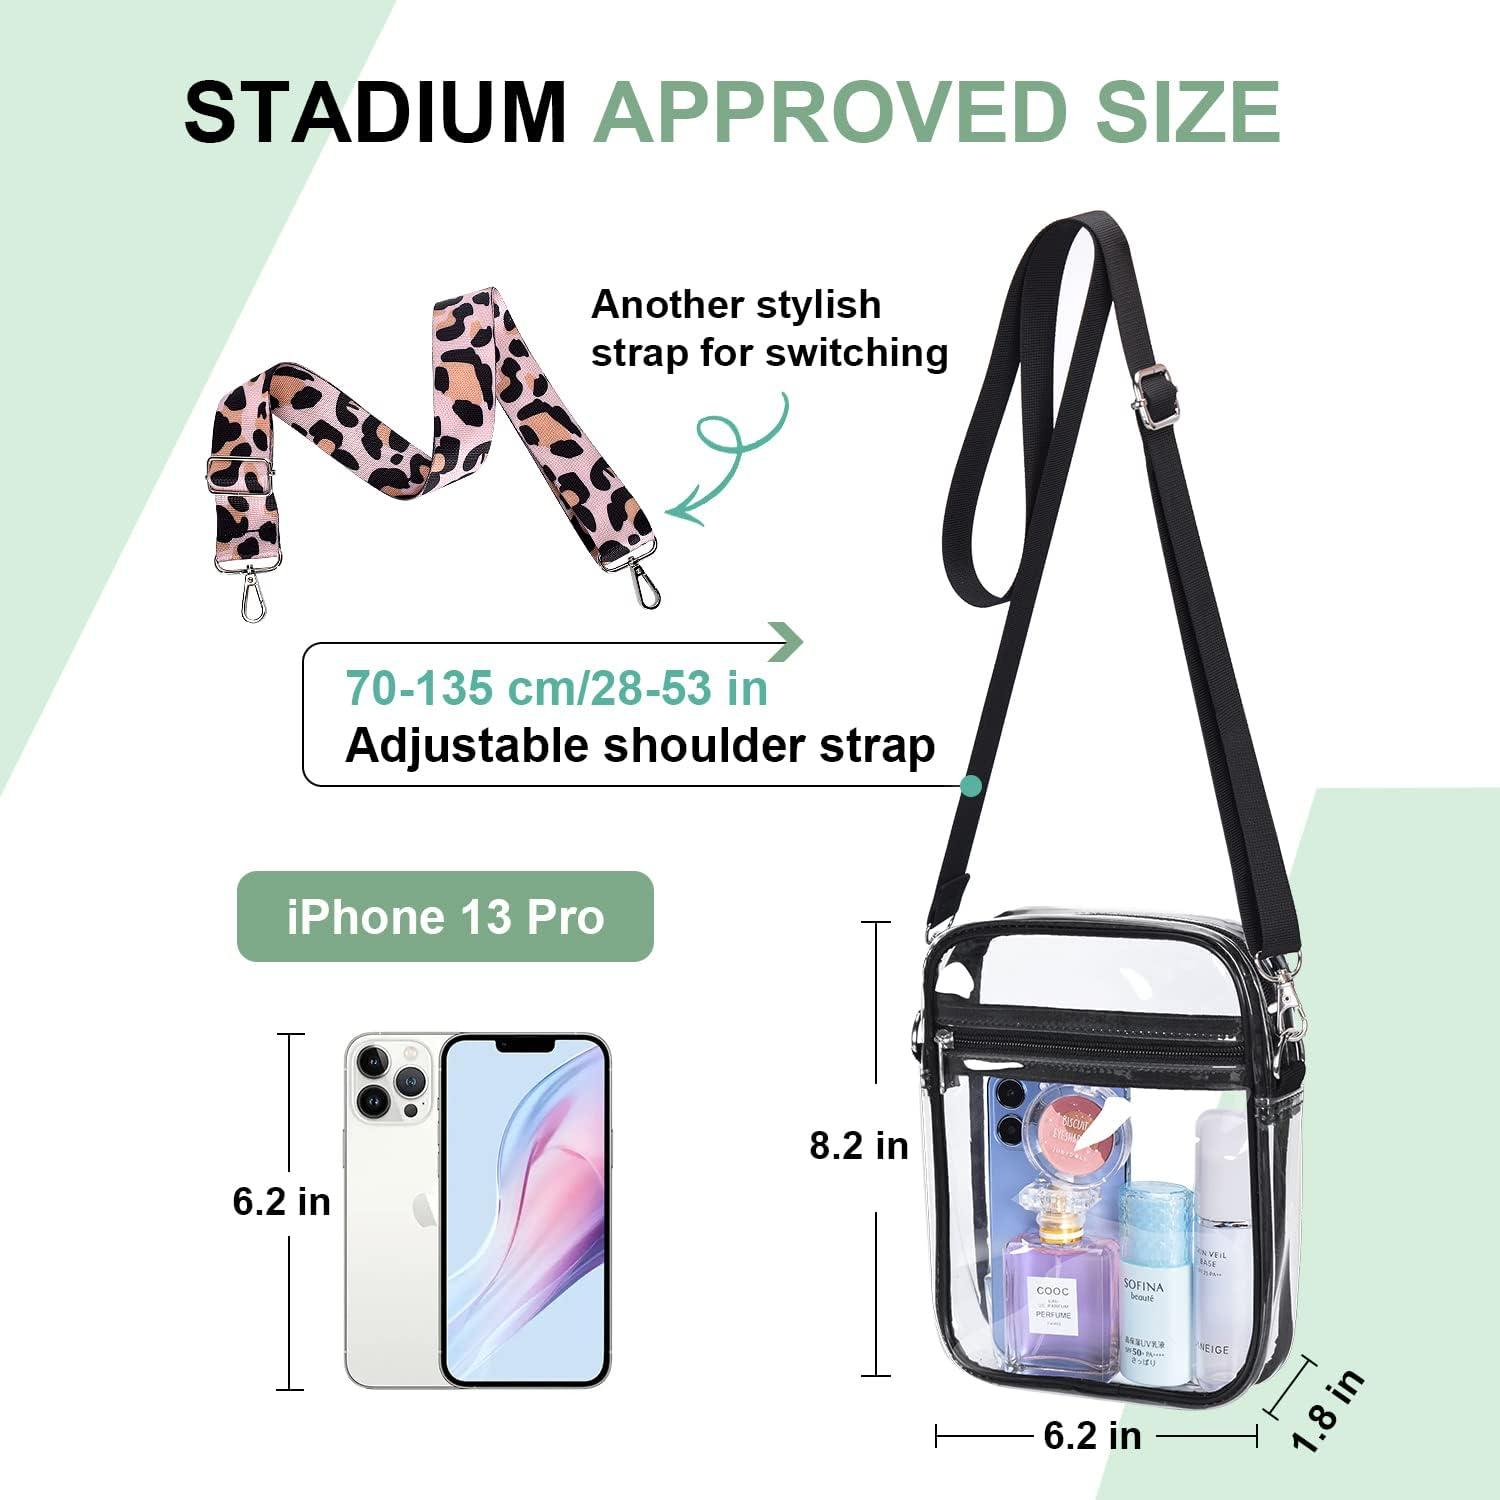 Clear Bag Stadium Approved for Women Small Cute Transparent Purse